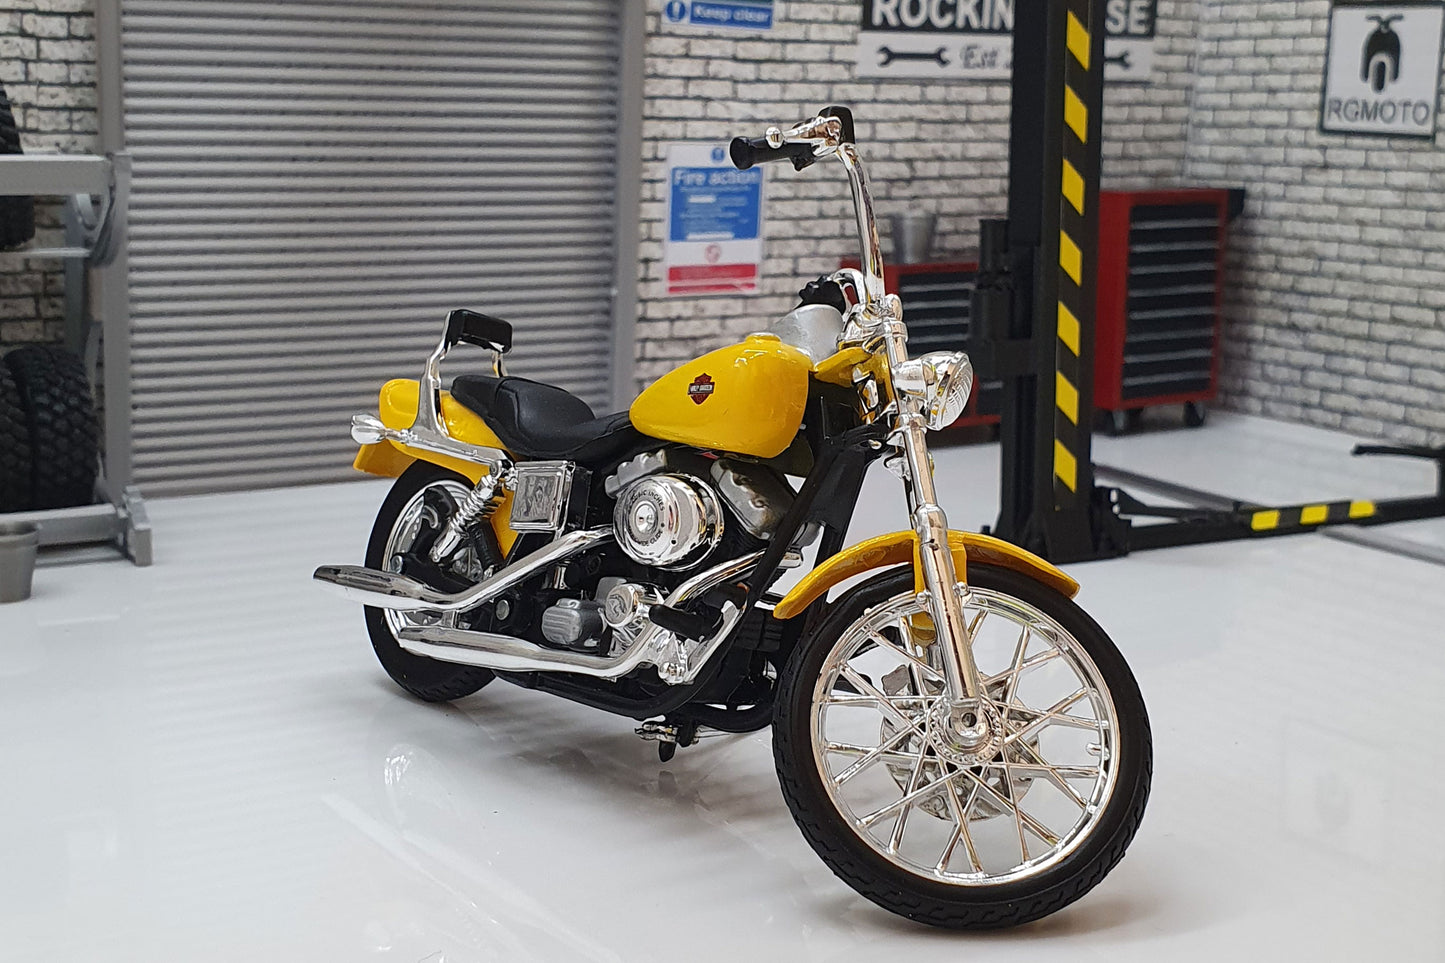 Harley Davidson FXDWG Dyna Wide Glide 2001 Yellow 1:18 Scale Model